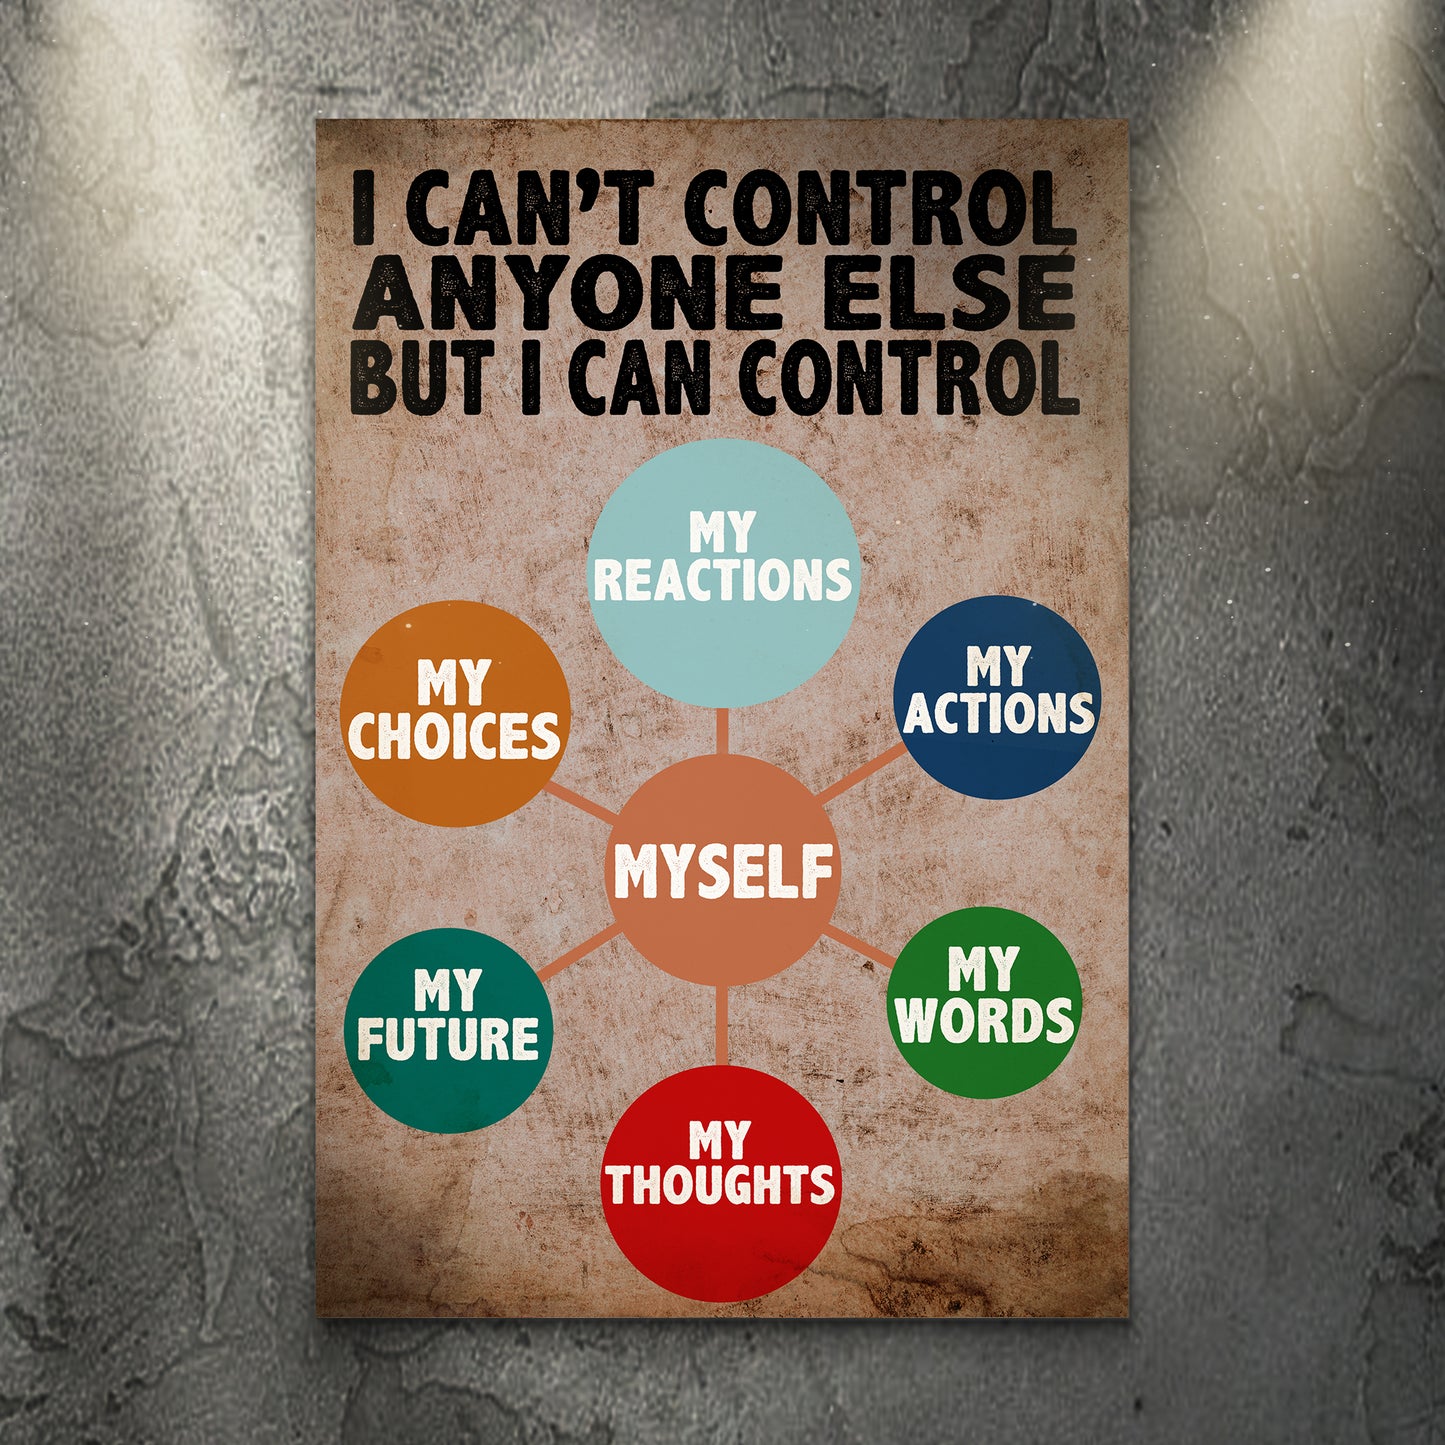 I Can't Control Anyone But I Can Control Myself Sign - Image by Tailored Canvases